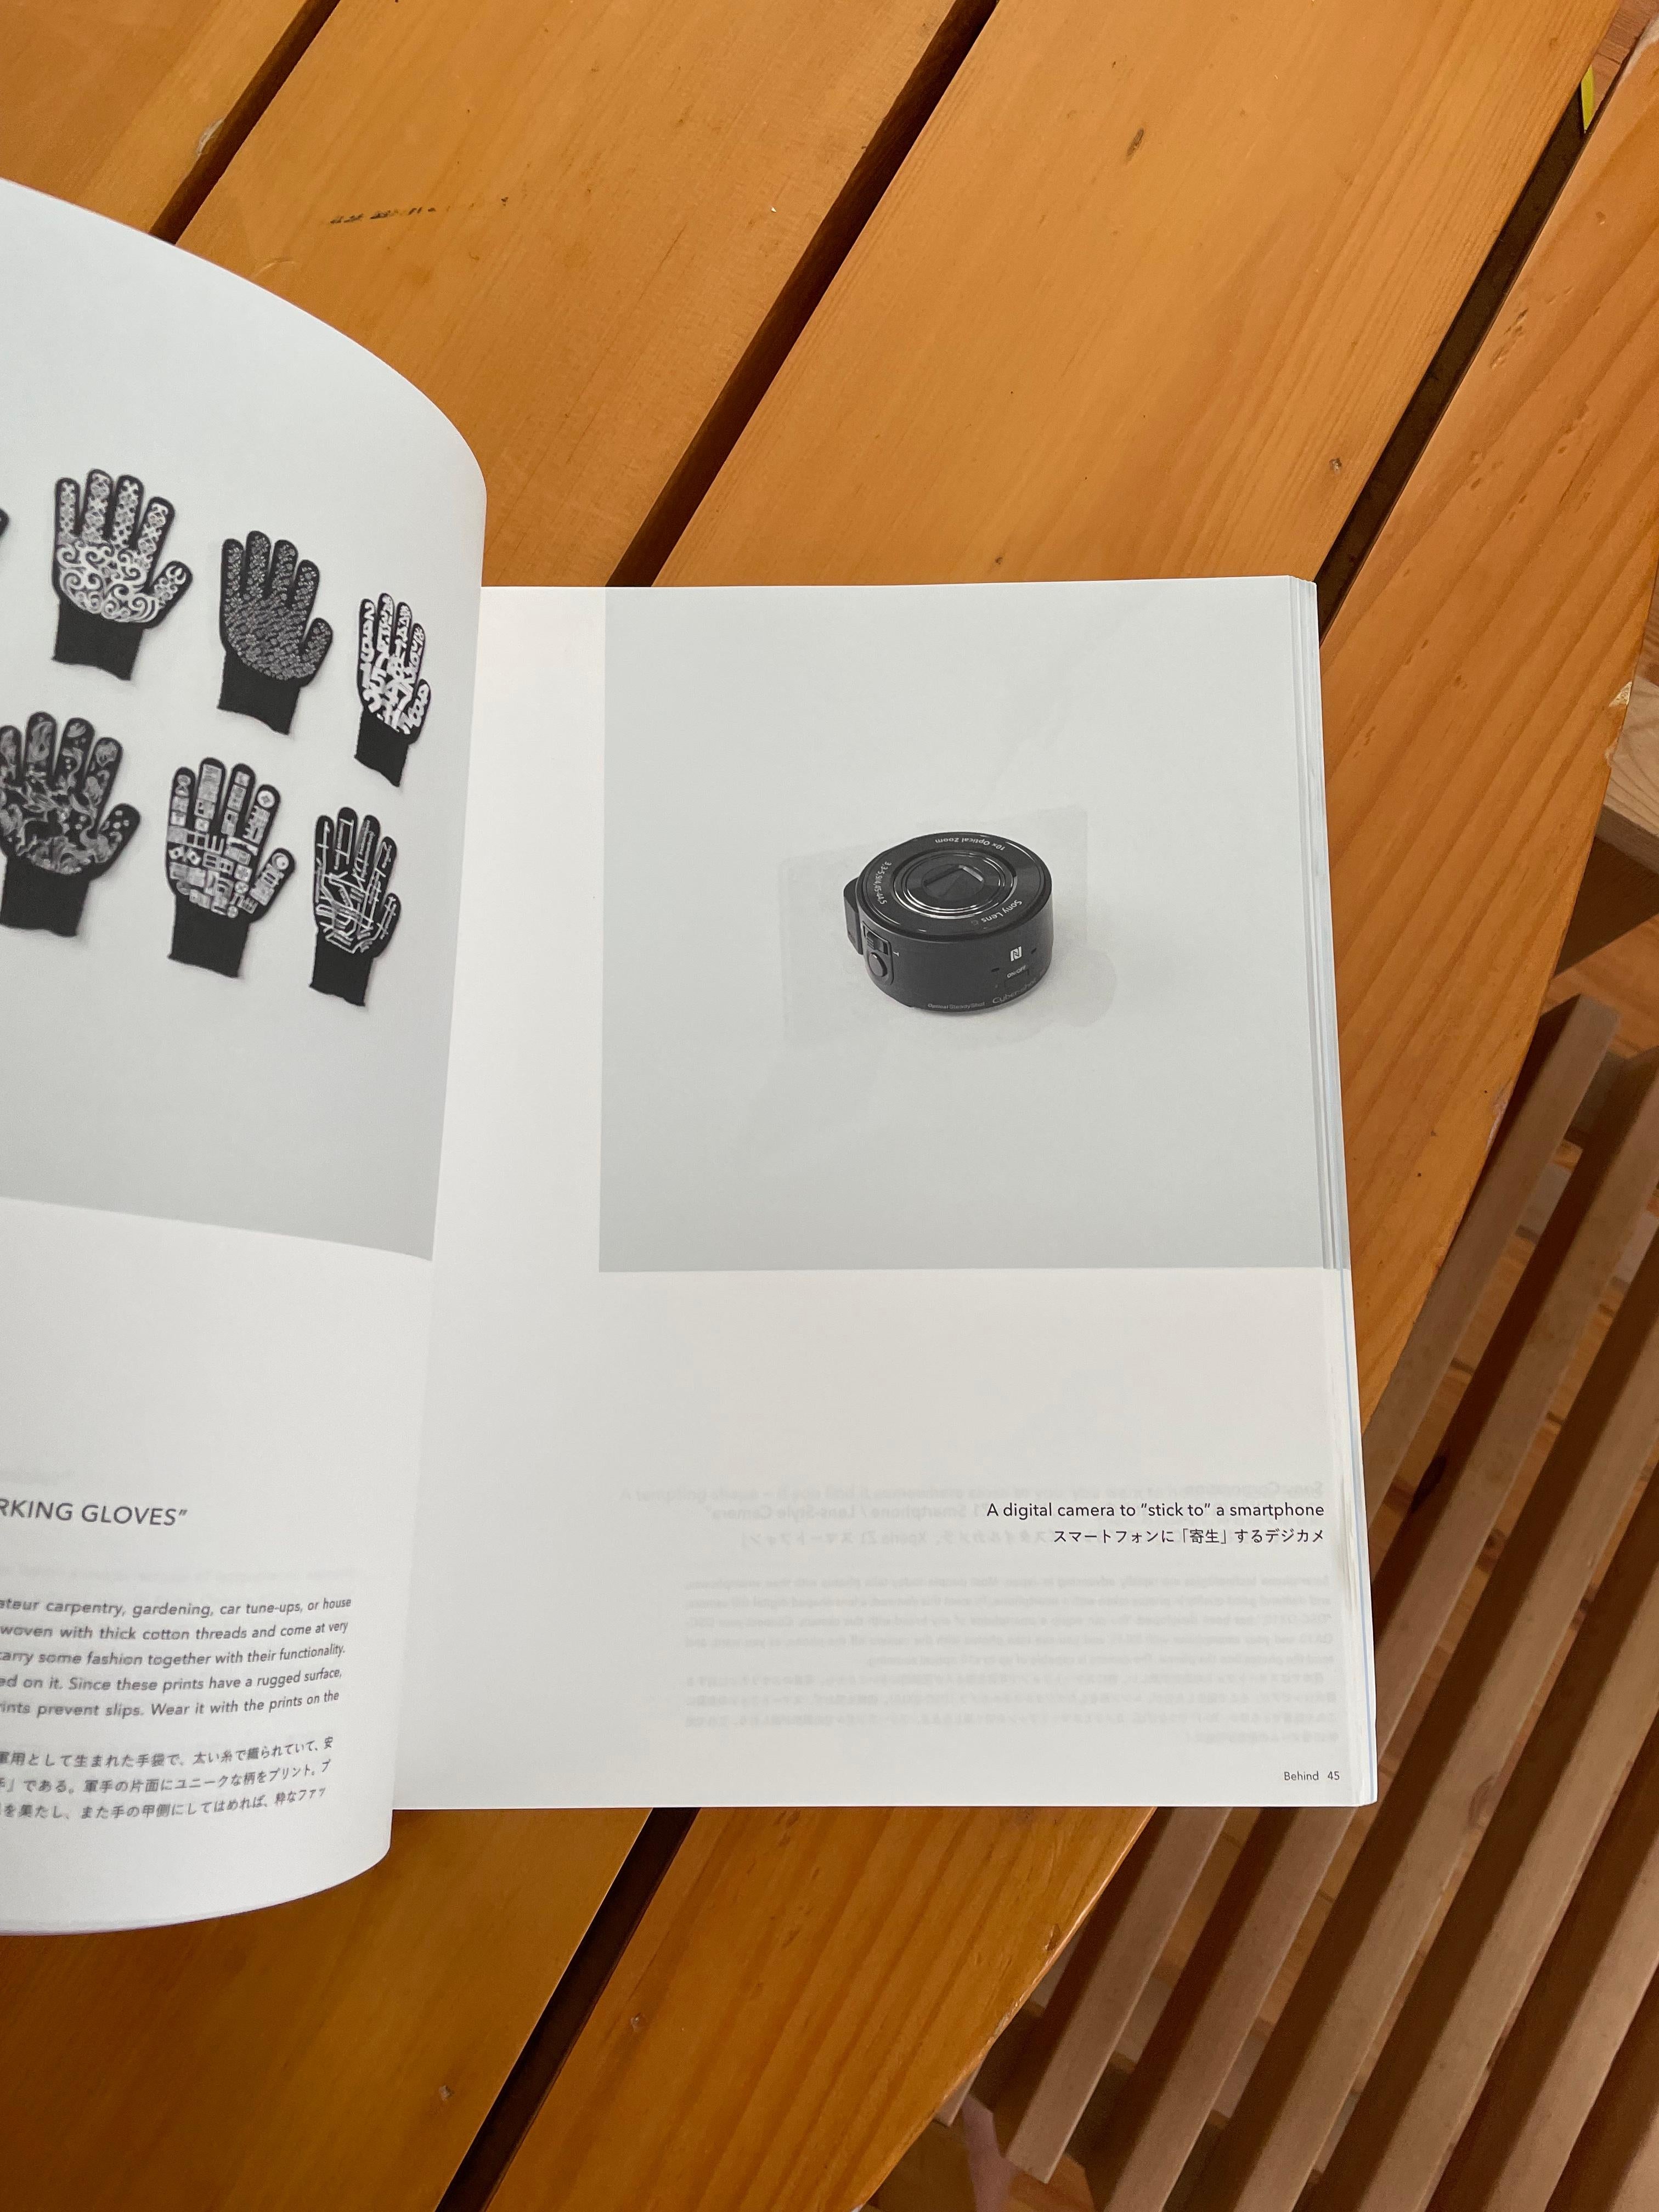 Incredible catalog for a design show in Singapore in 2014 that was funded by JETRO and curated by nendo.
It adheres to an exhibition structure of three themes  